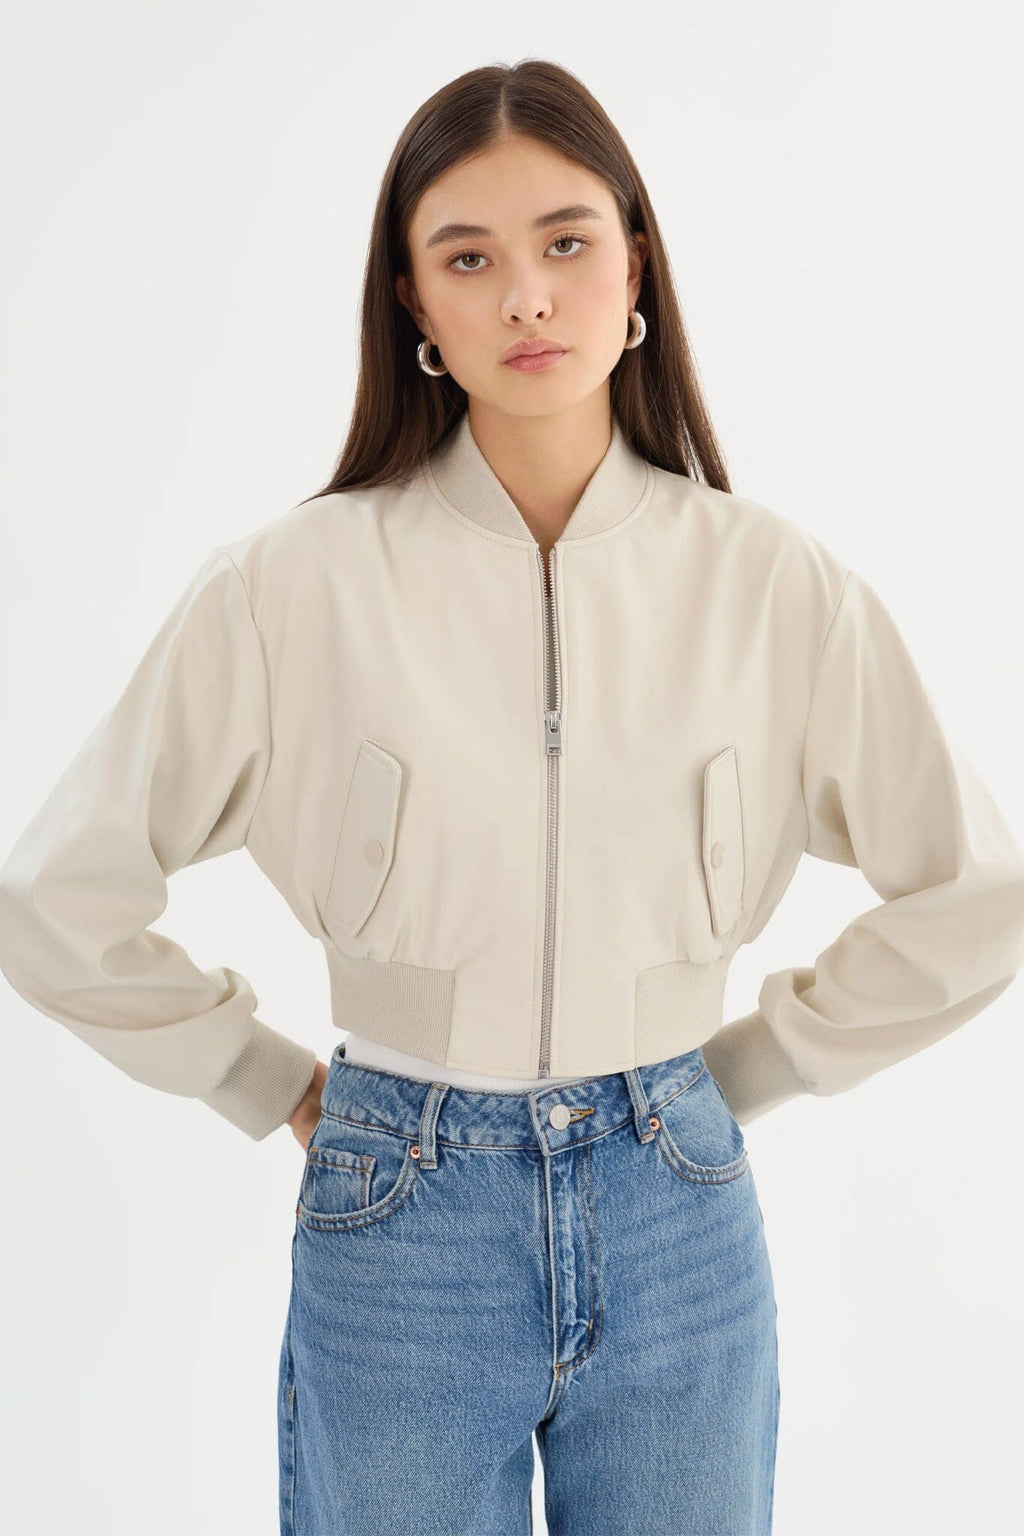 LAMARQUE | Evelin Faux Leather Cropped Bomber - Bone